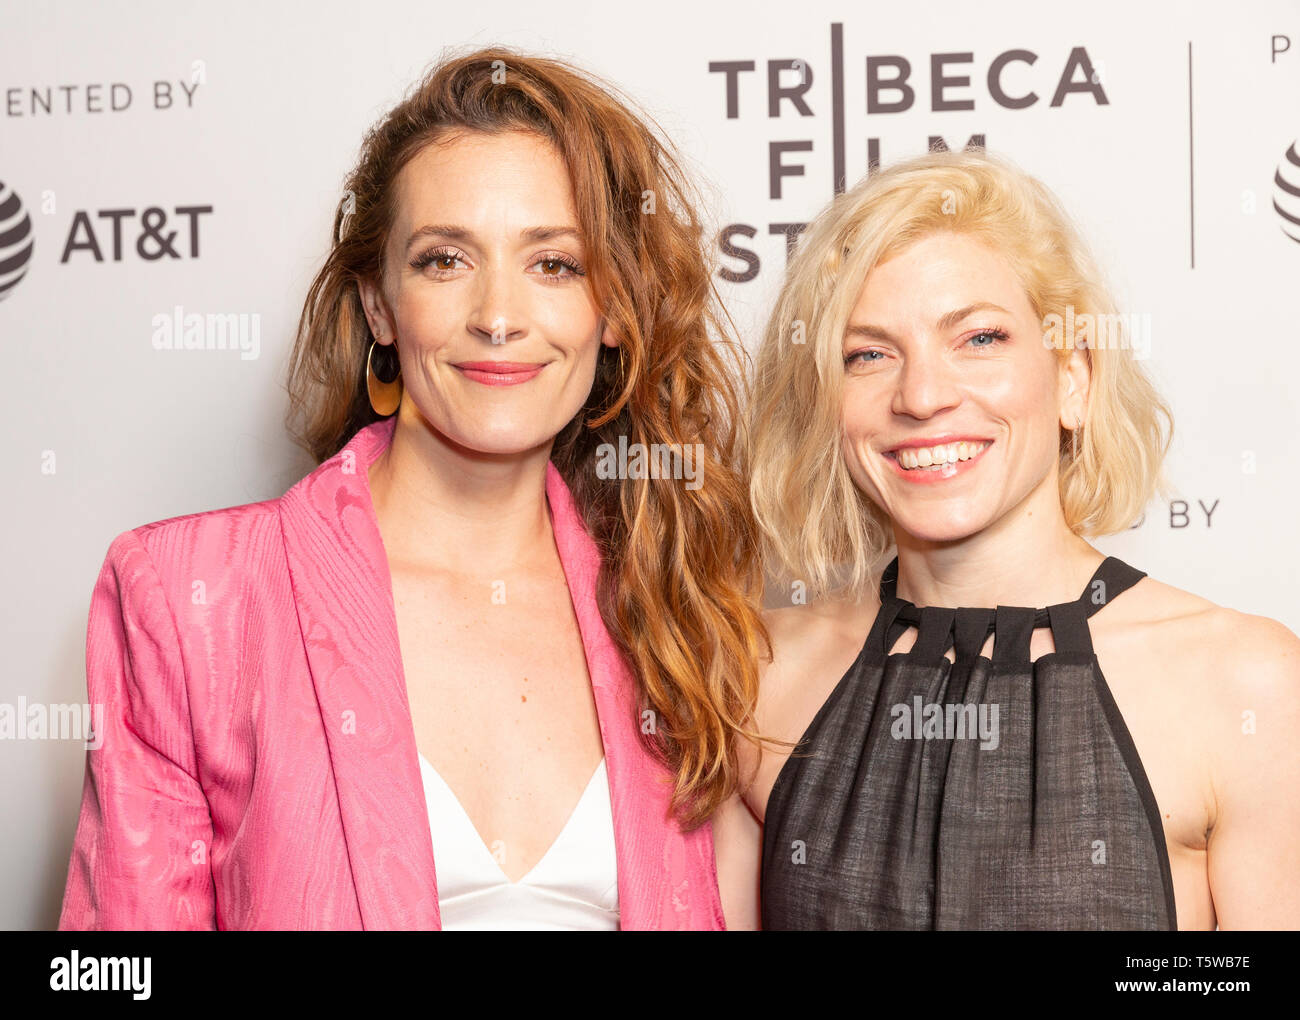 New York, NY - April 26, 2019: Danielle Krudy, Bridget Savage Cole attend the Blow The Man Down screening at Tribeca Film Festival at SVA Theatre Stock Photo